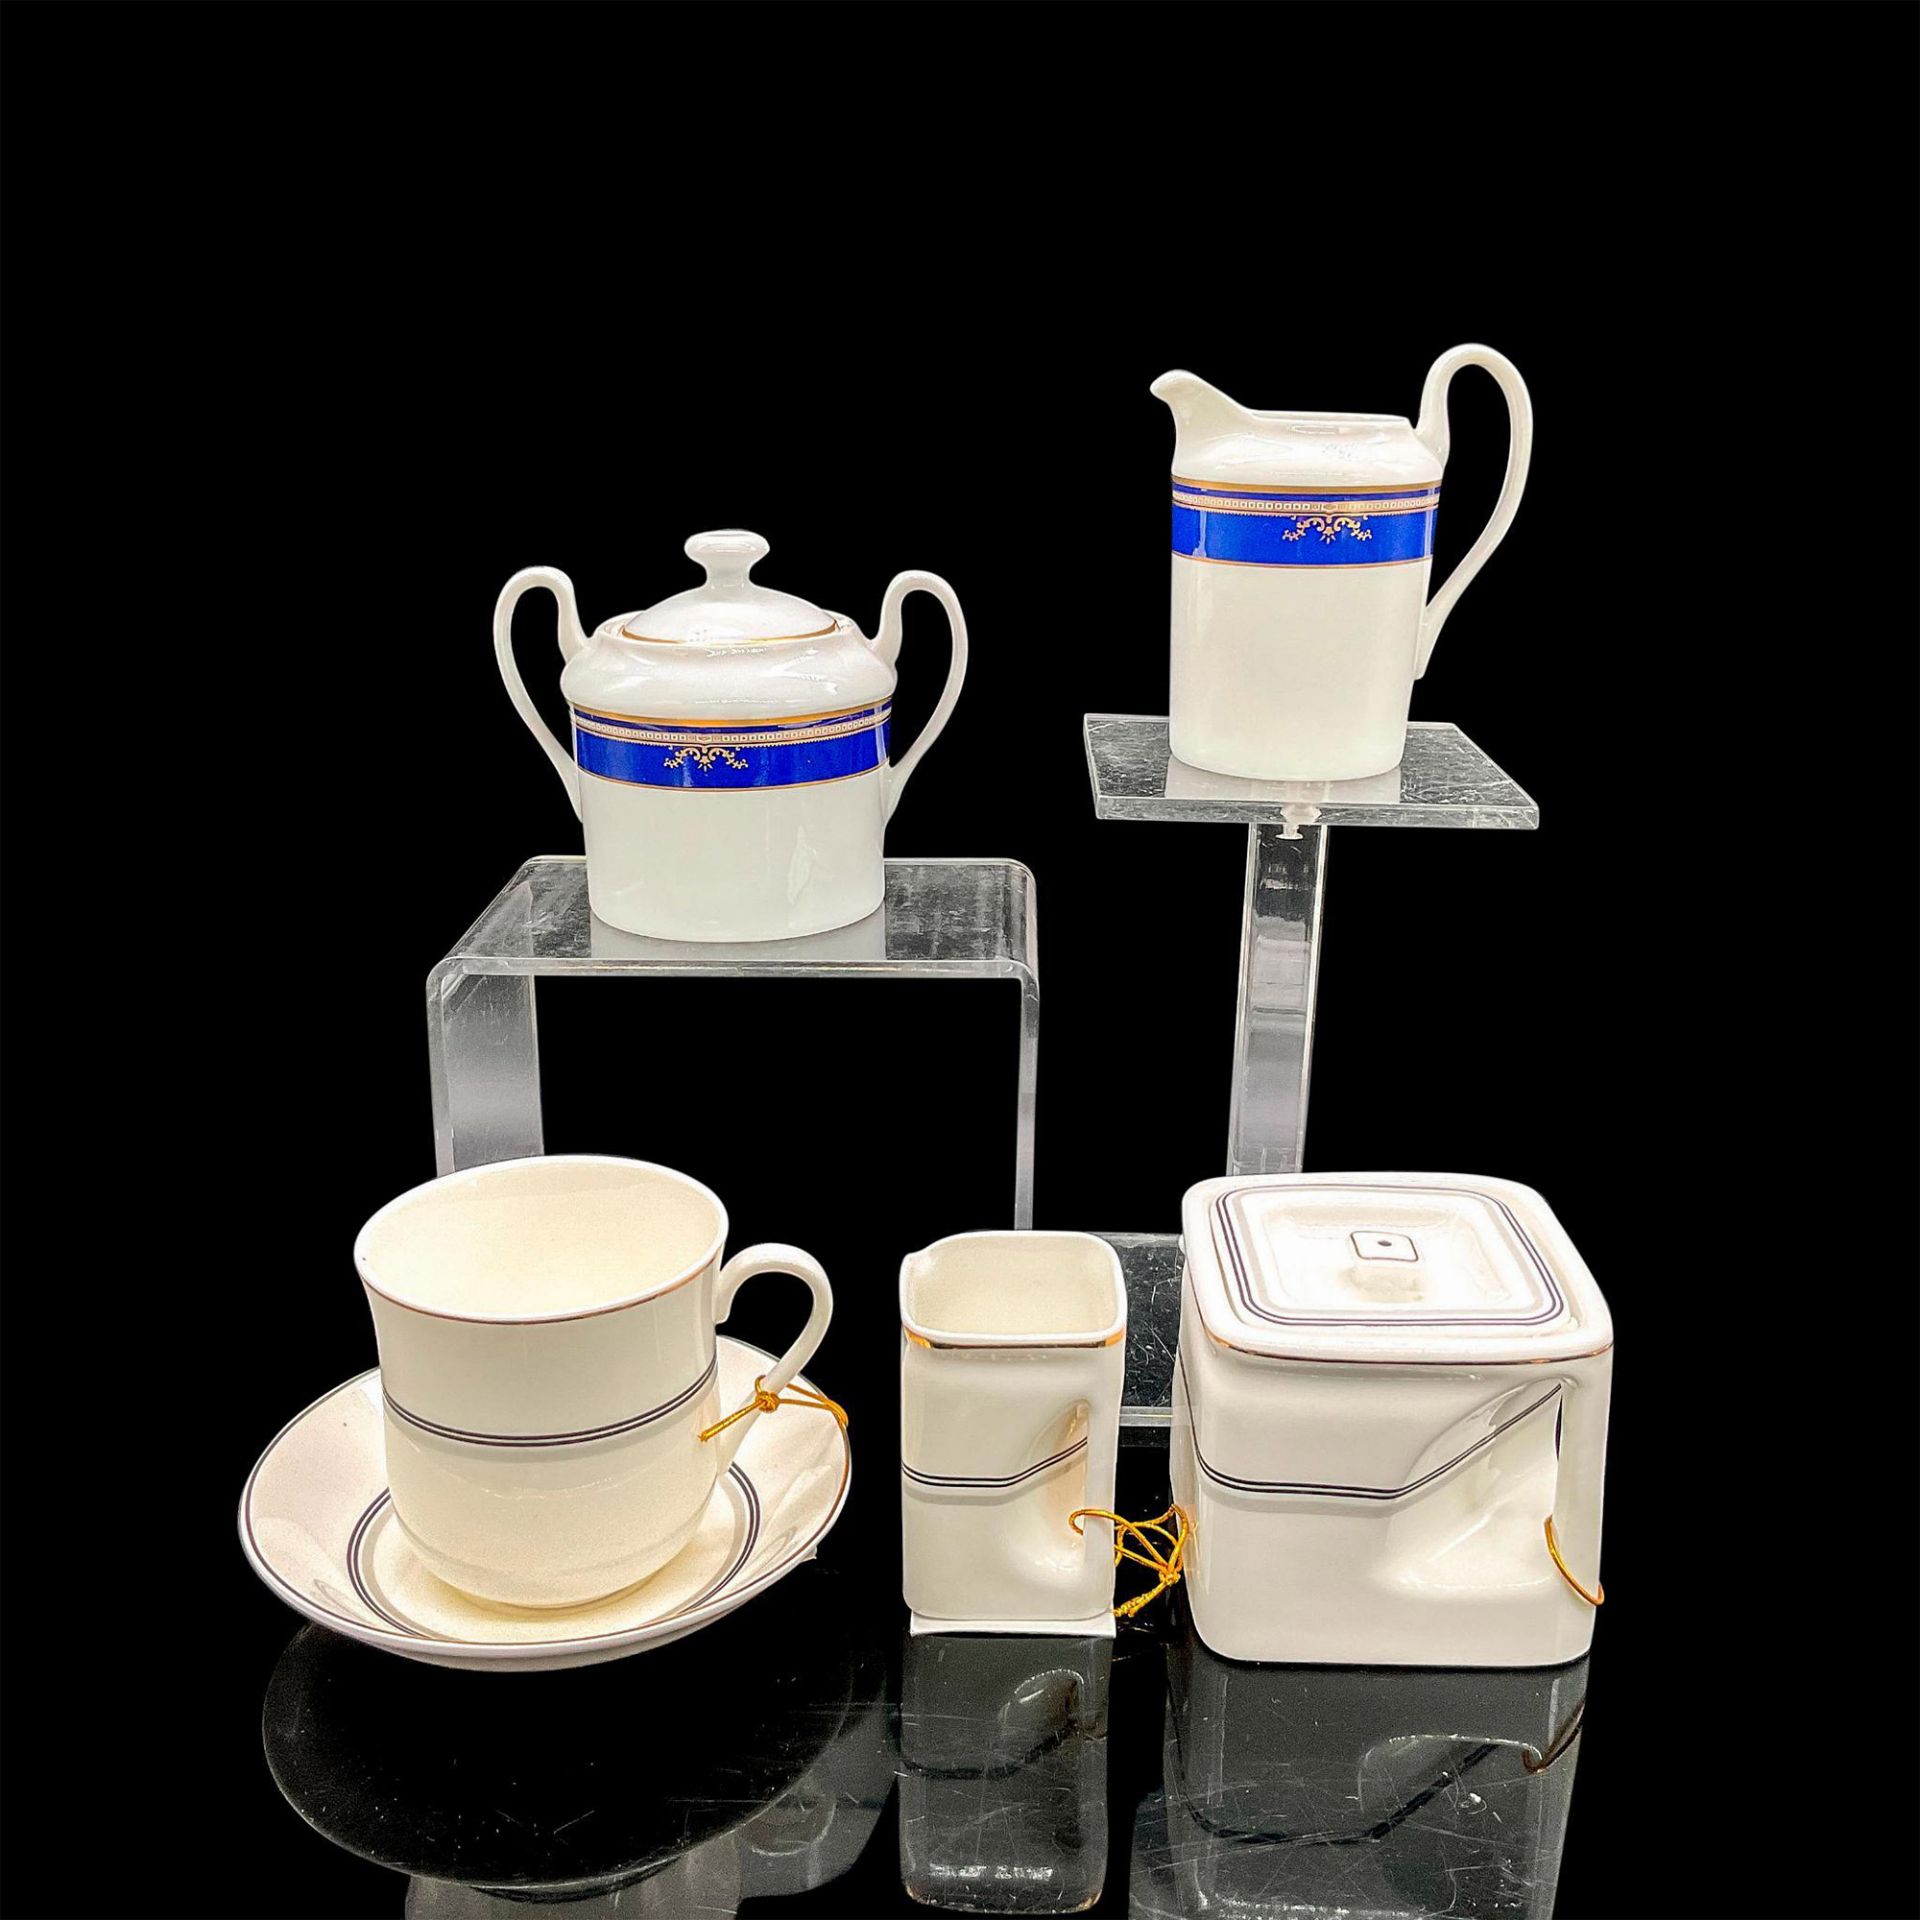 6pc Tea Serving Set, Queen Mary and Titanic Replicas